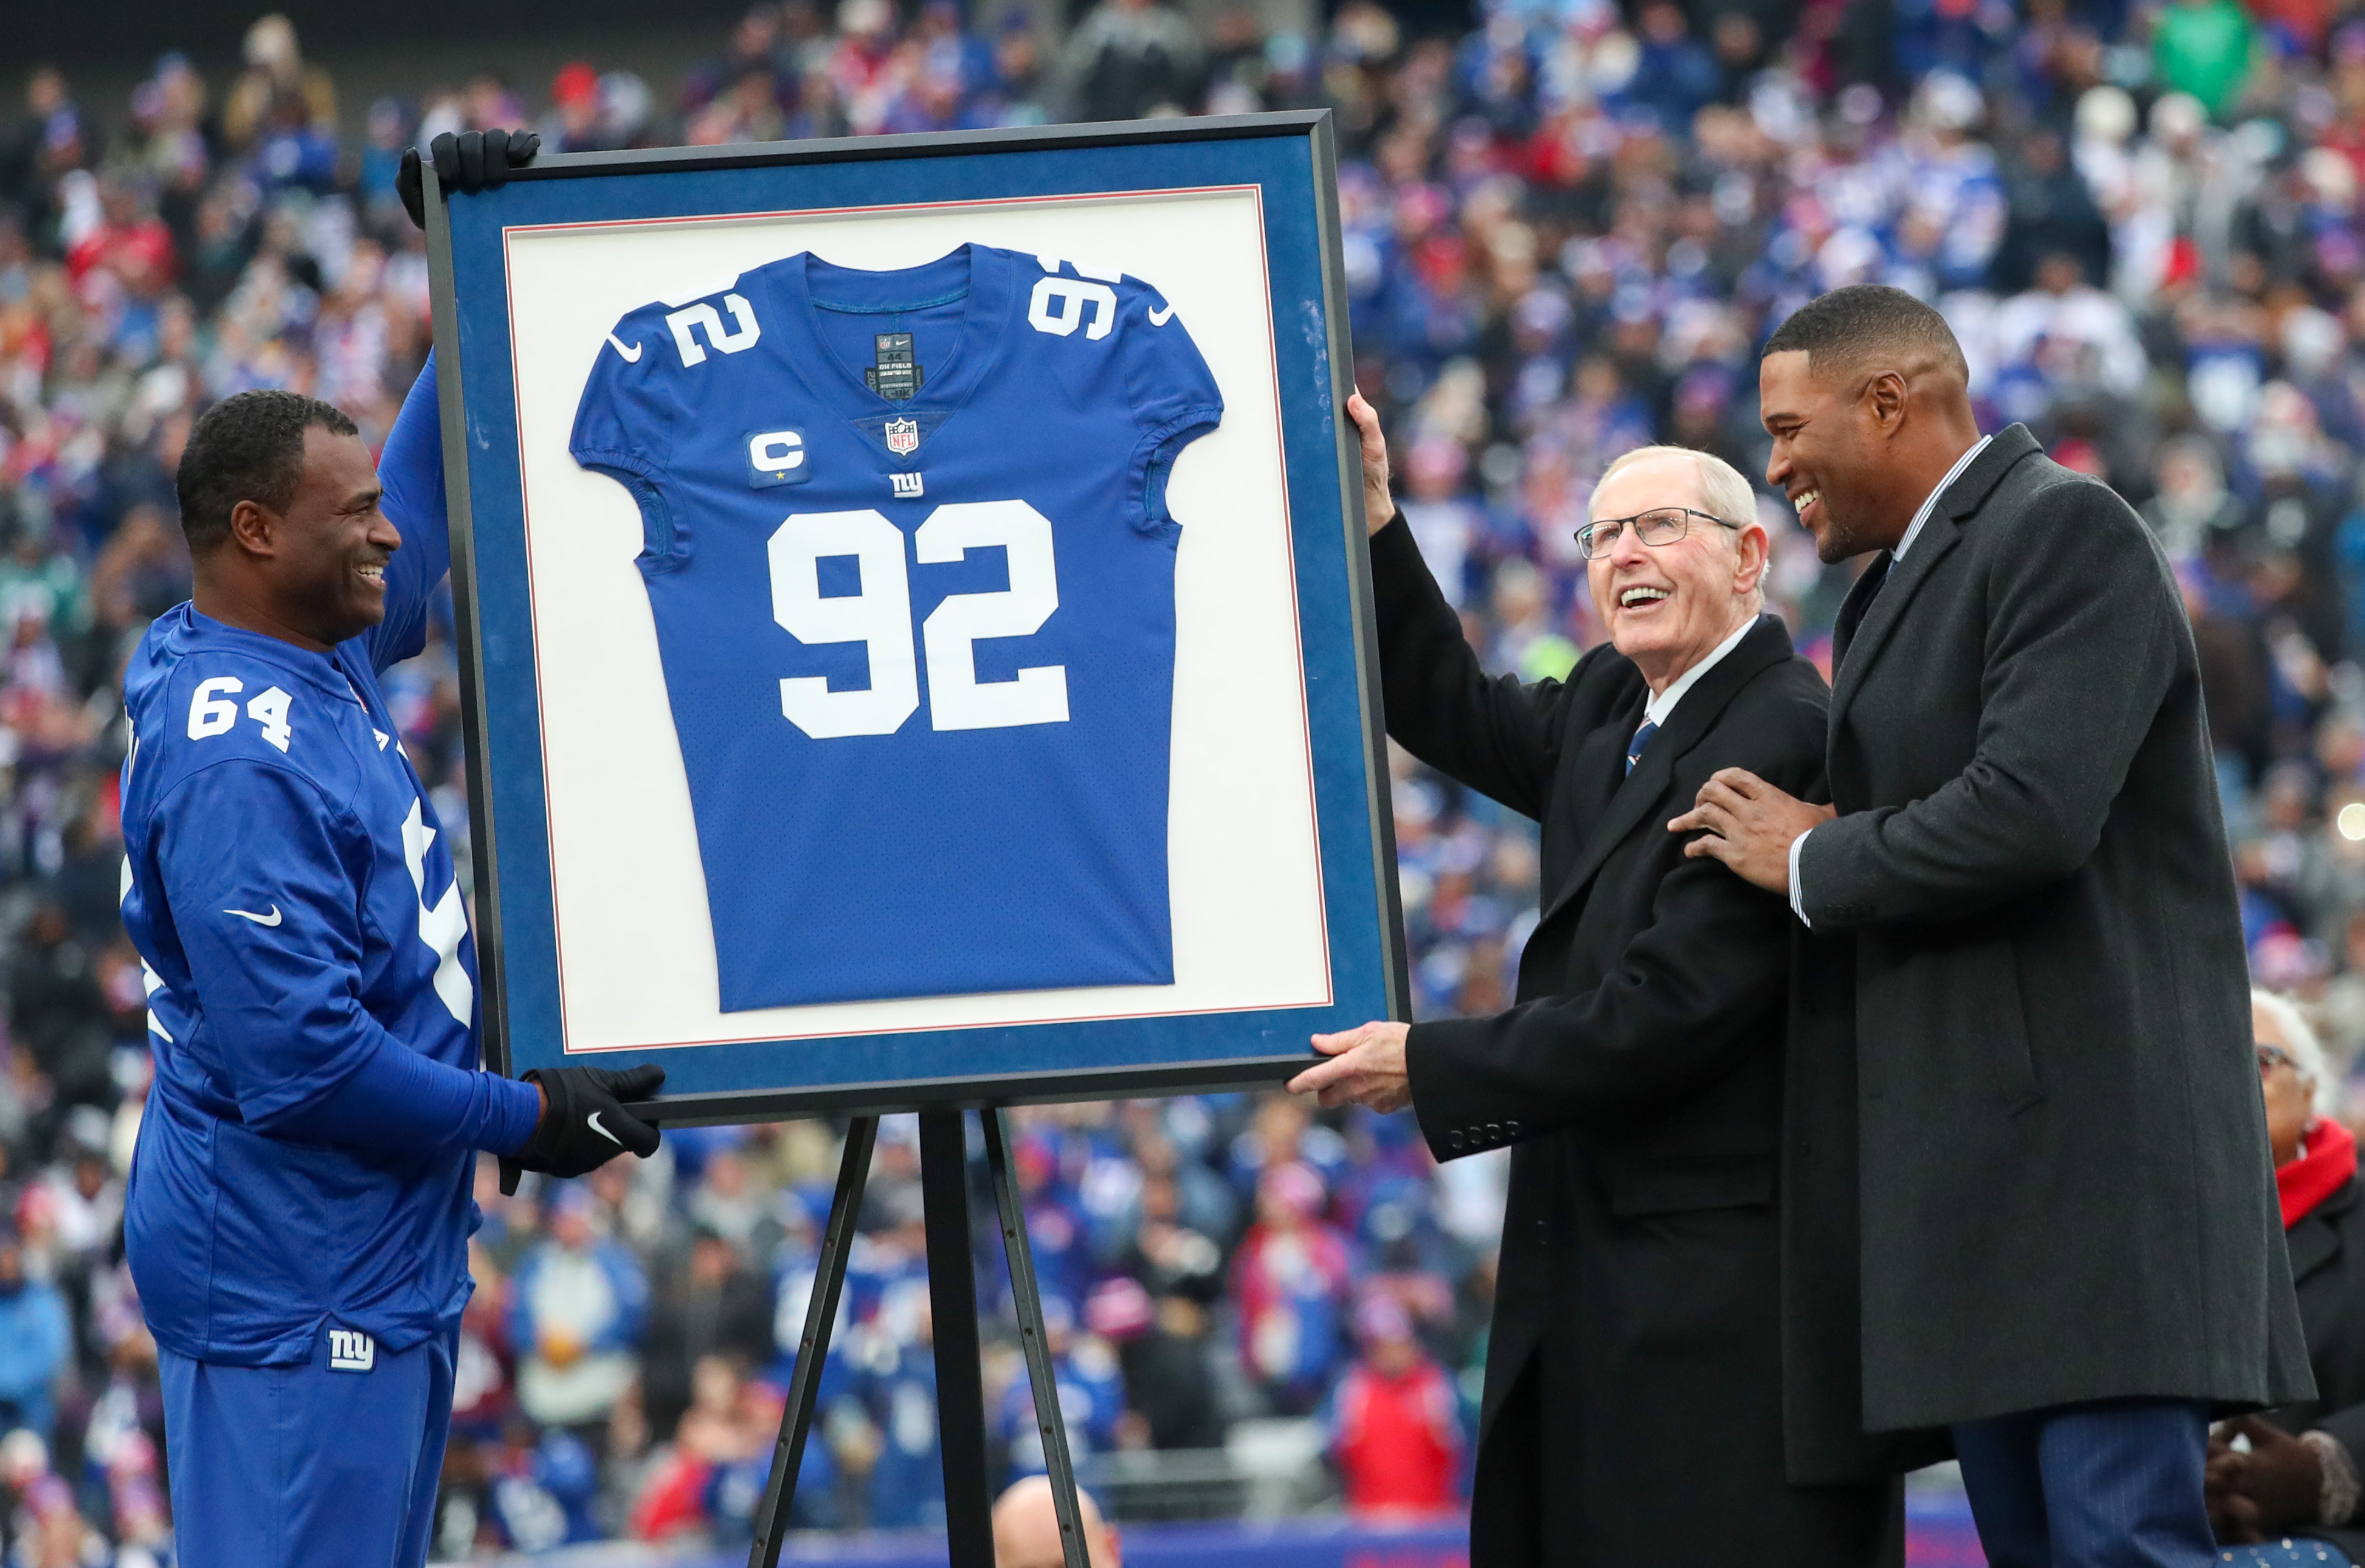 Former New York Giants linebacker Jesse Armstead, head coach Tom Coughlin and Michael Strahan during a halftime ceremony to retire Strahan’s No. 92 jersey on Sunday, Nov. 28, 2021 at MetLife Stadium.